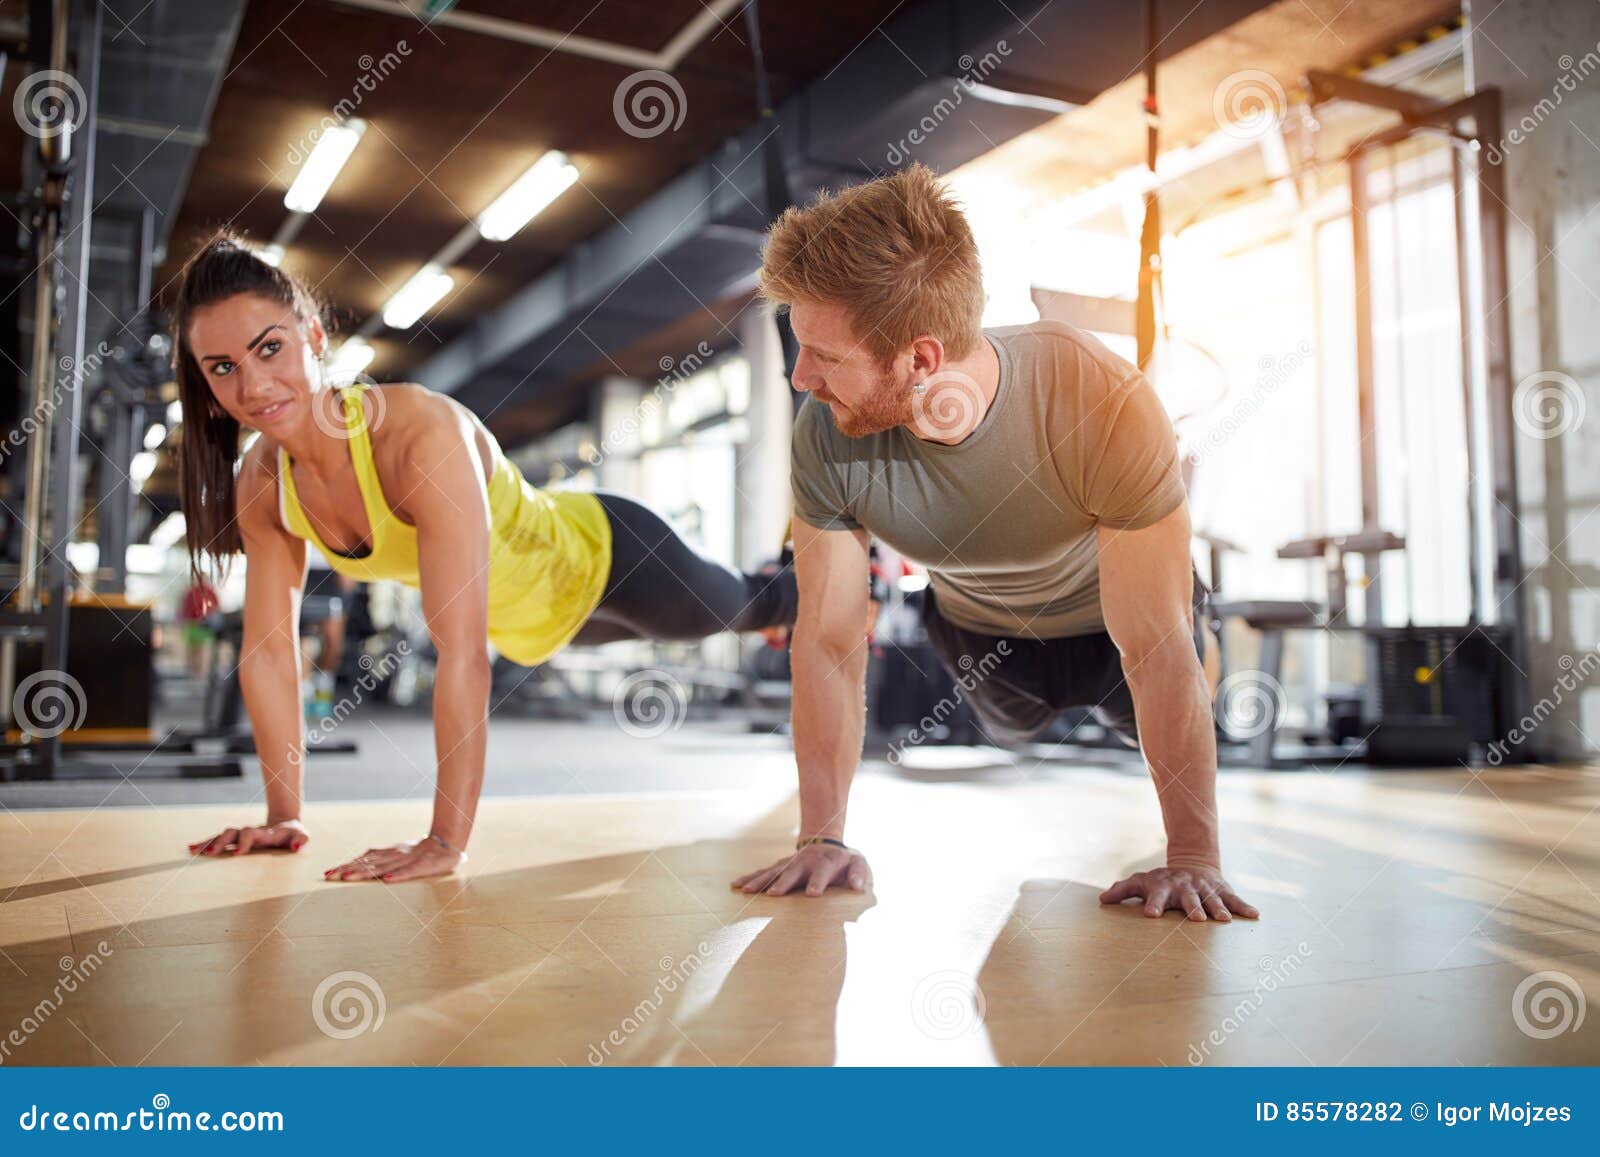 female and male doing exercises for strengthen hands